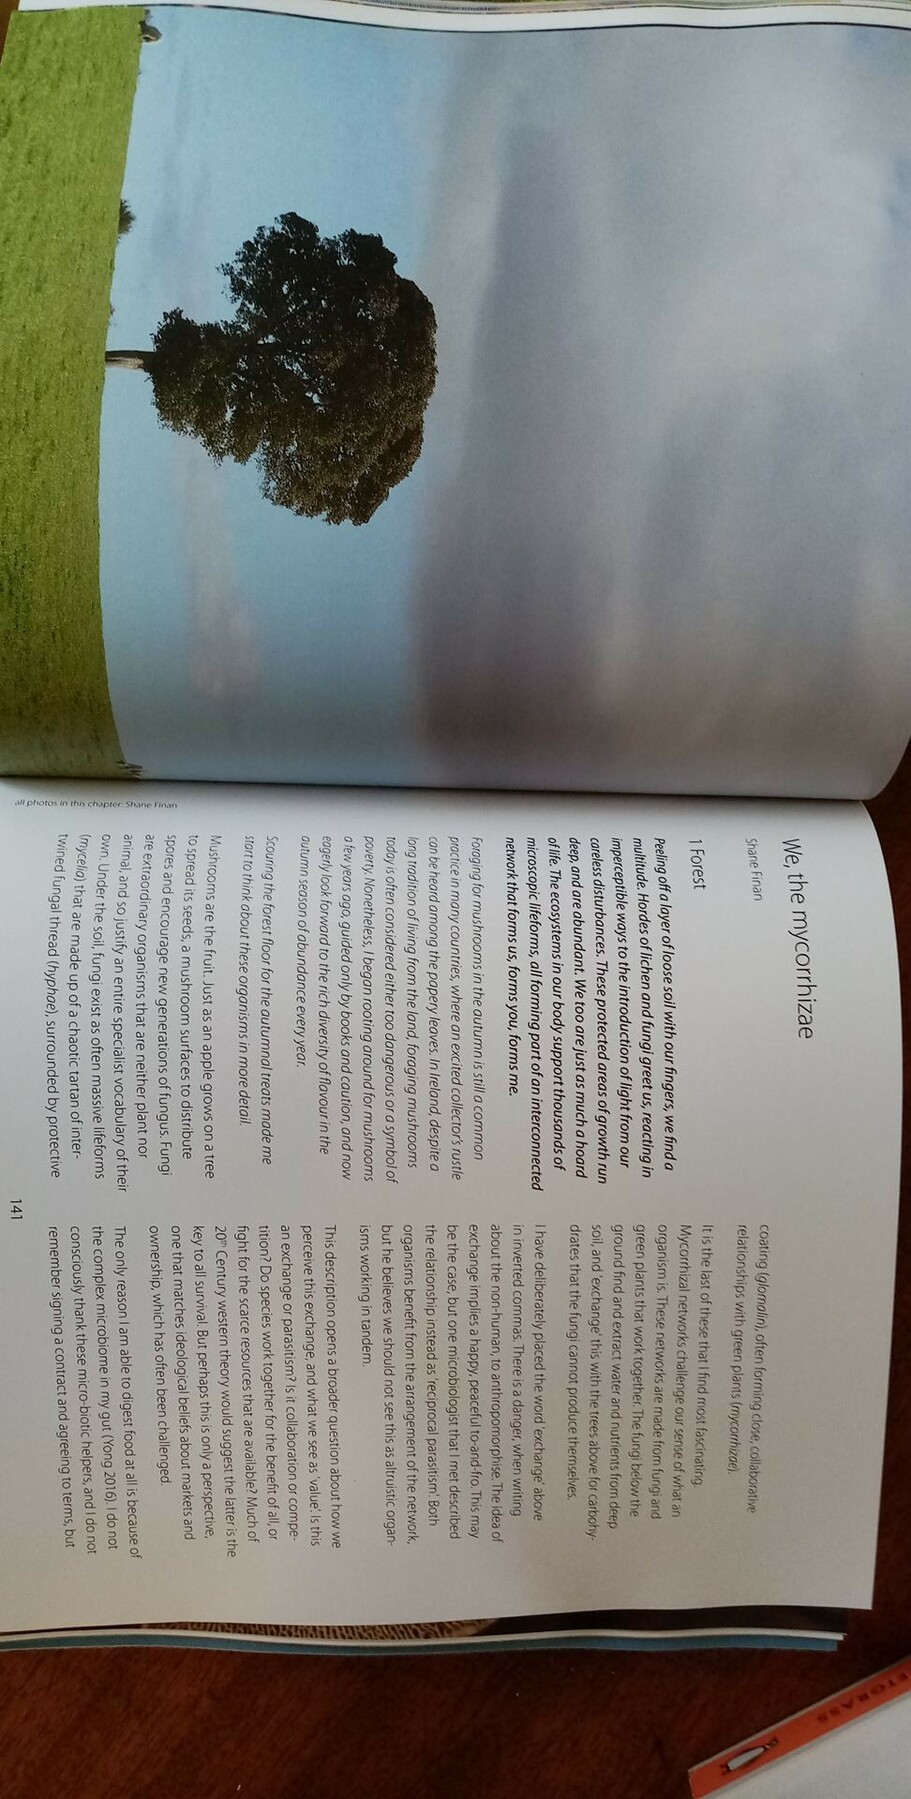 A photograph of the same book as in the other photograph, now opened to a 2-page spread. On the left page is a full page photograph of a lone tree in a field. On the right is the first page of an essay, printed in two columns, called 'We, the Mycorrhizae'.